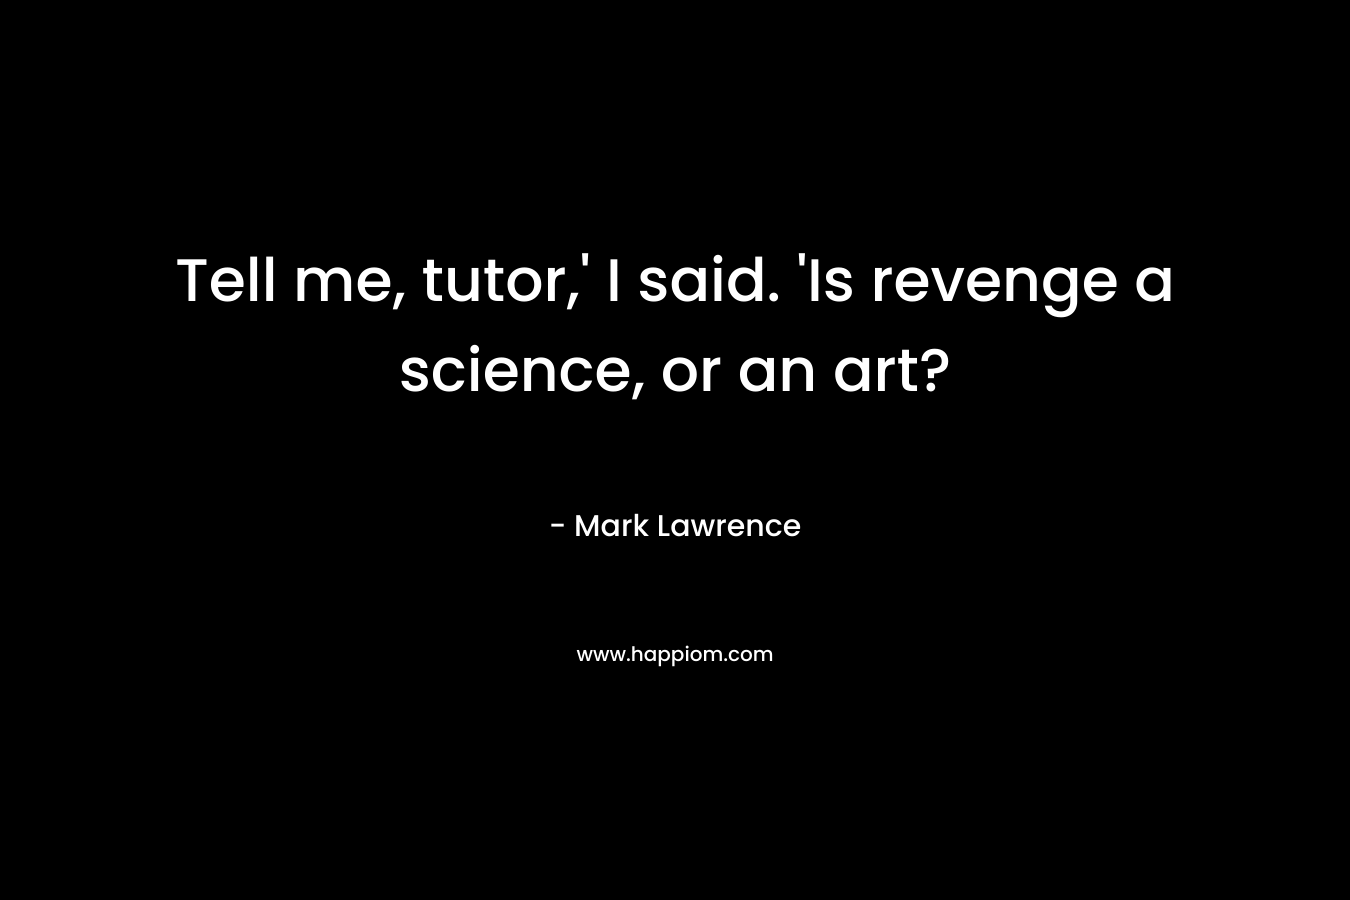 Tell me, tutor,' I said. 'Is revenge a science, or an art?